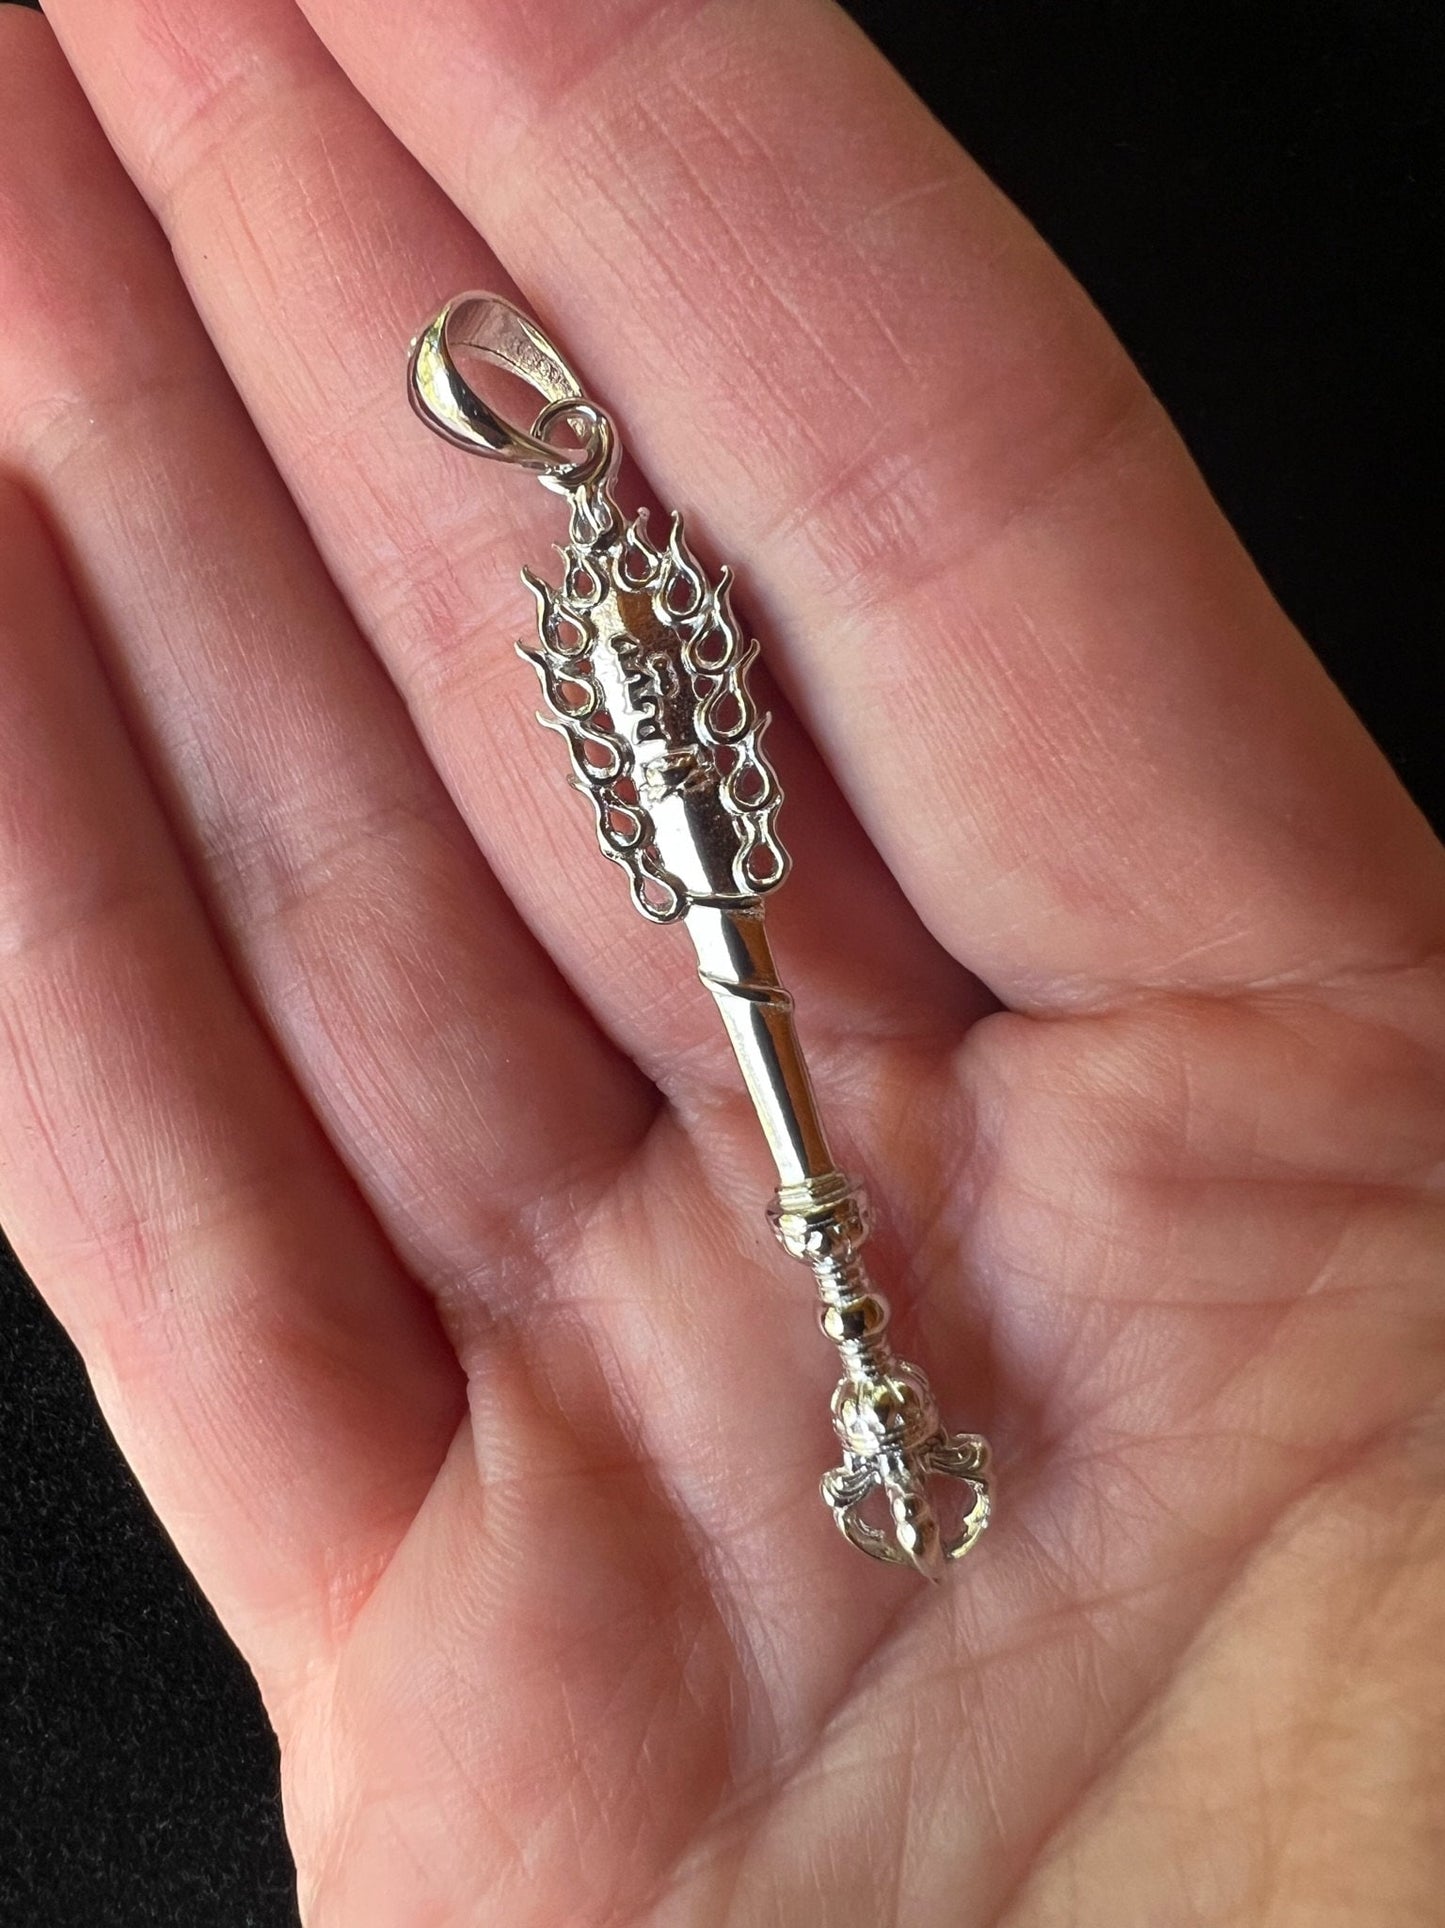 Silver Manjushri Wisdom Sword Pendant | 925 Sterling Silver | Approx. 2in | Wisdom and Insight | Pendant Only